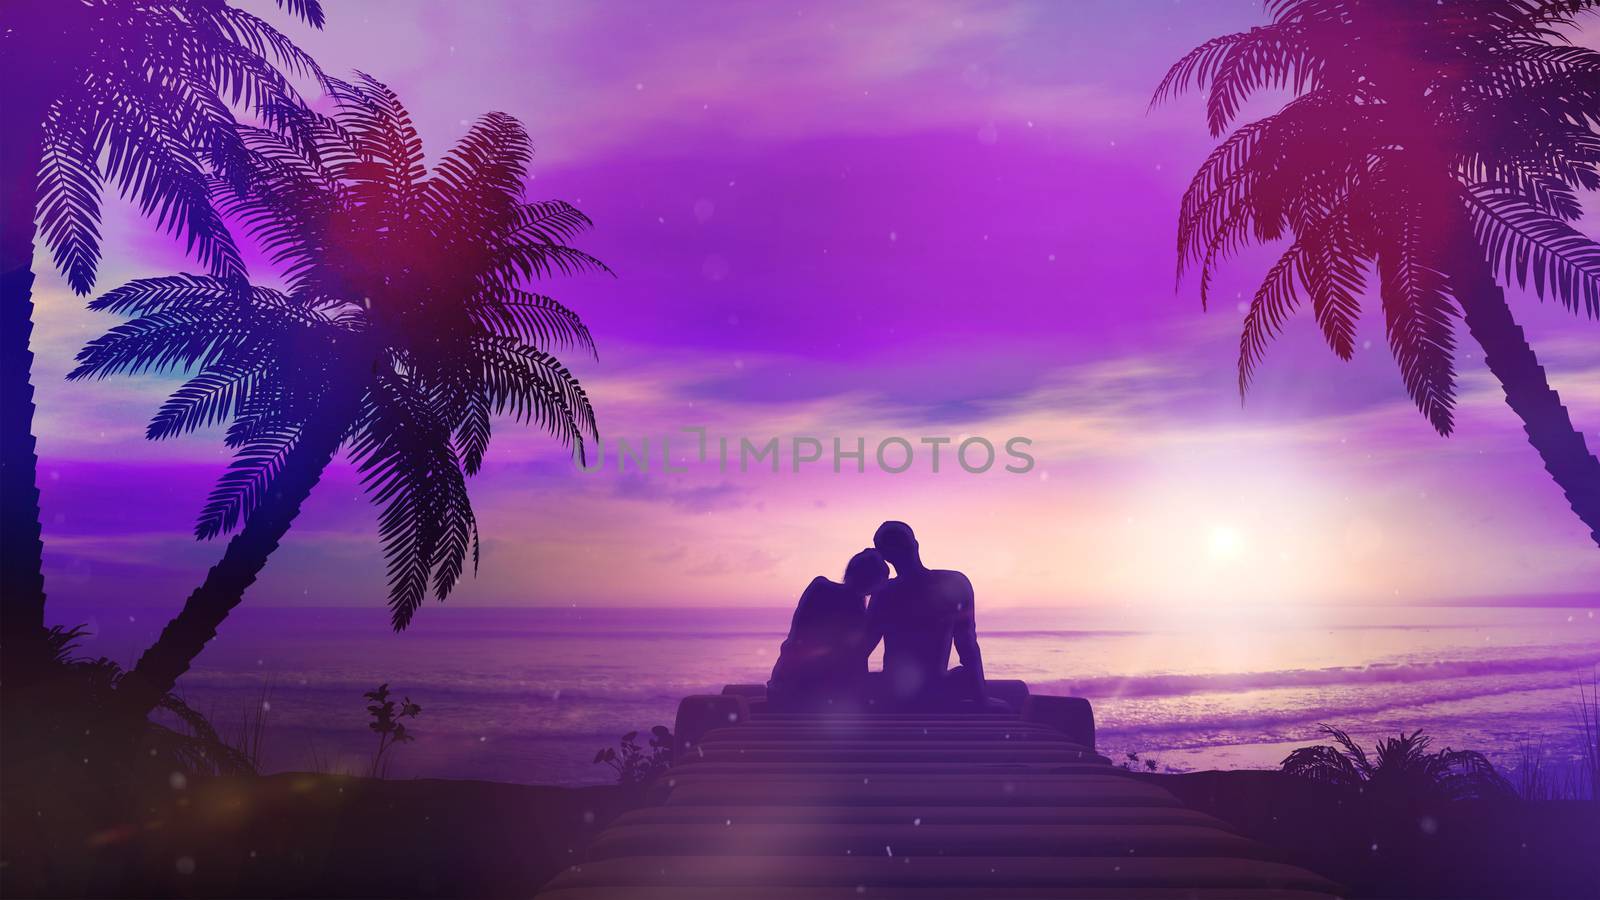 A beautiful romantic illustration that displays a happy couple is greeted by a dawn by the ocean.